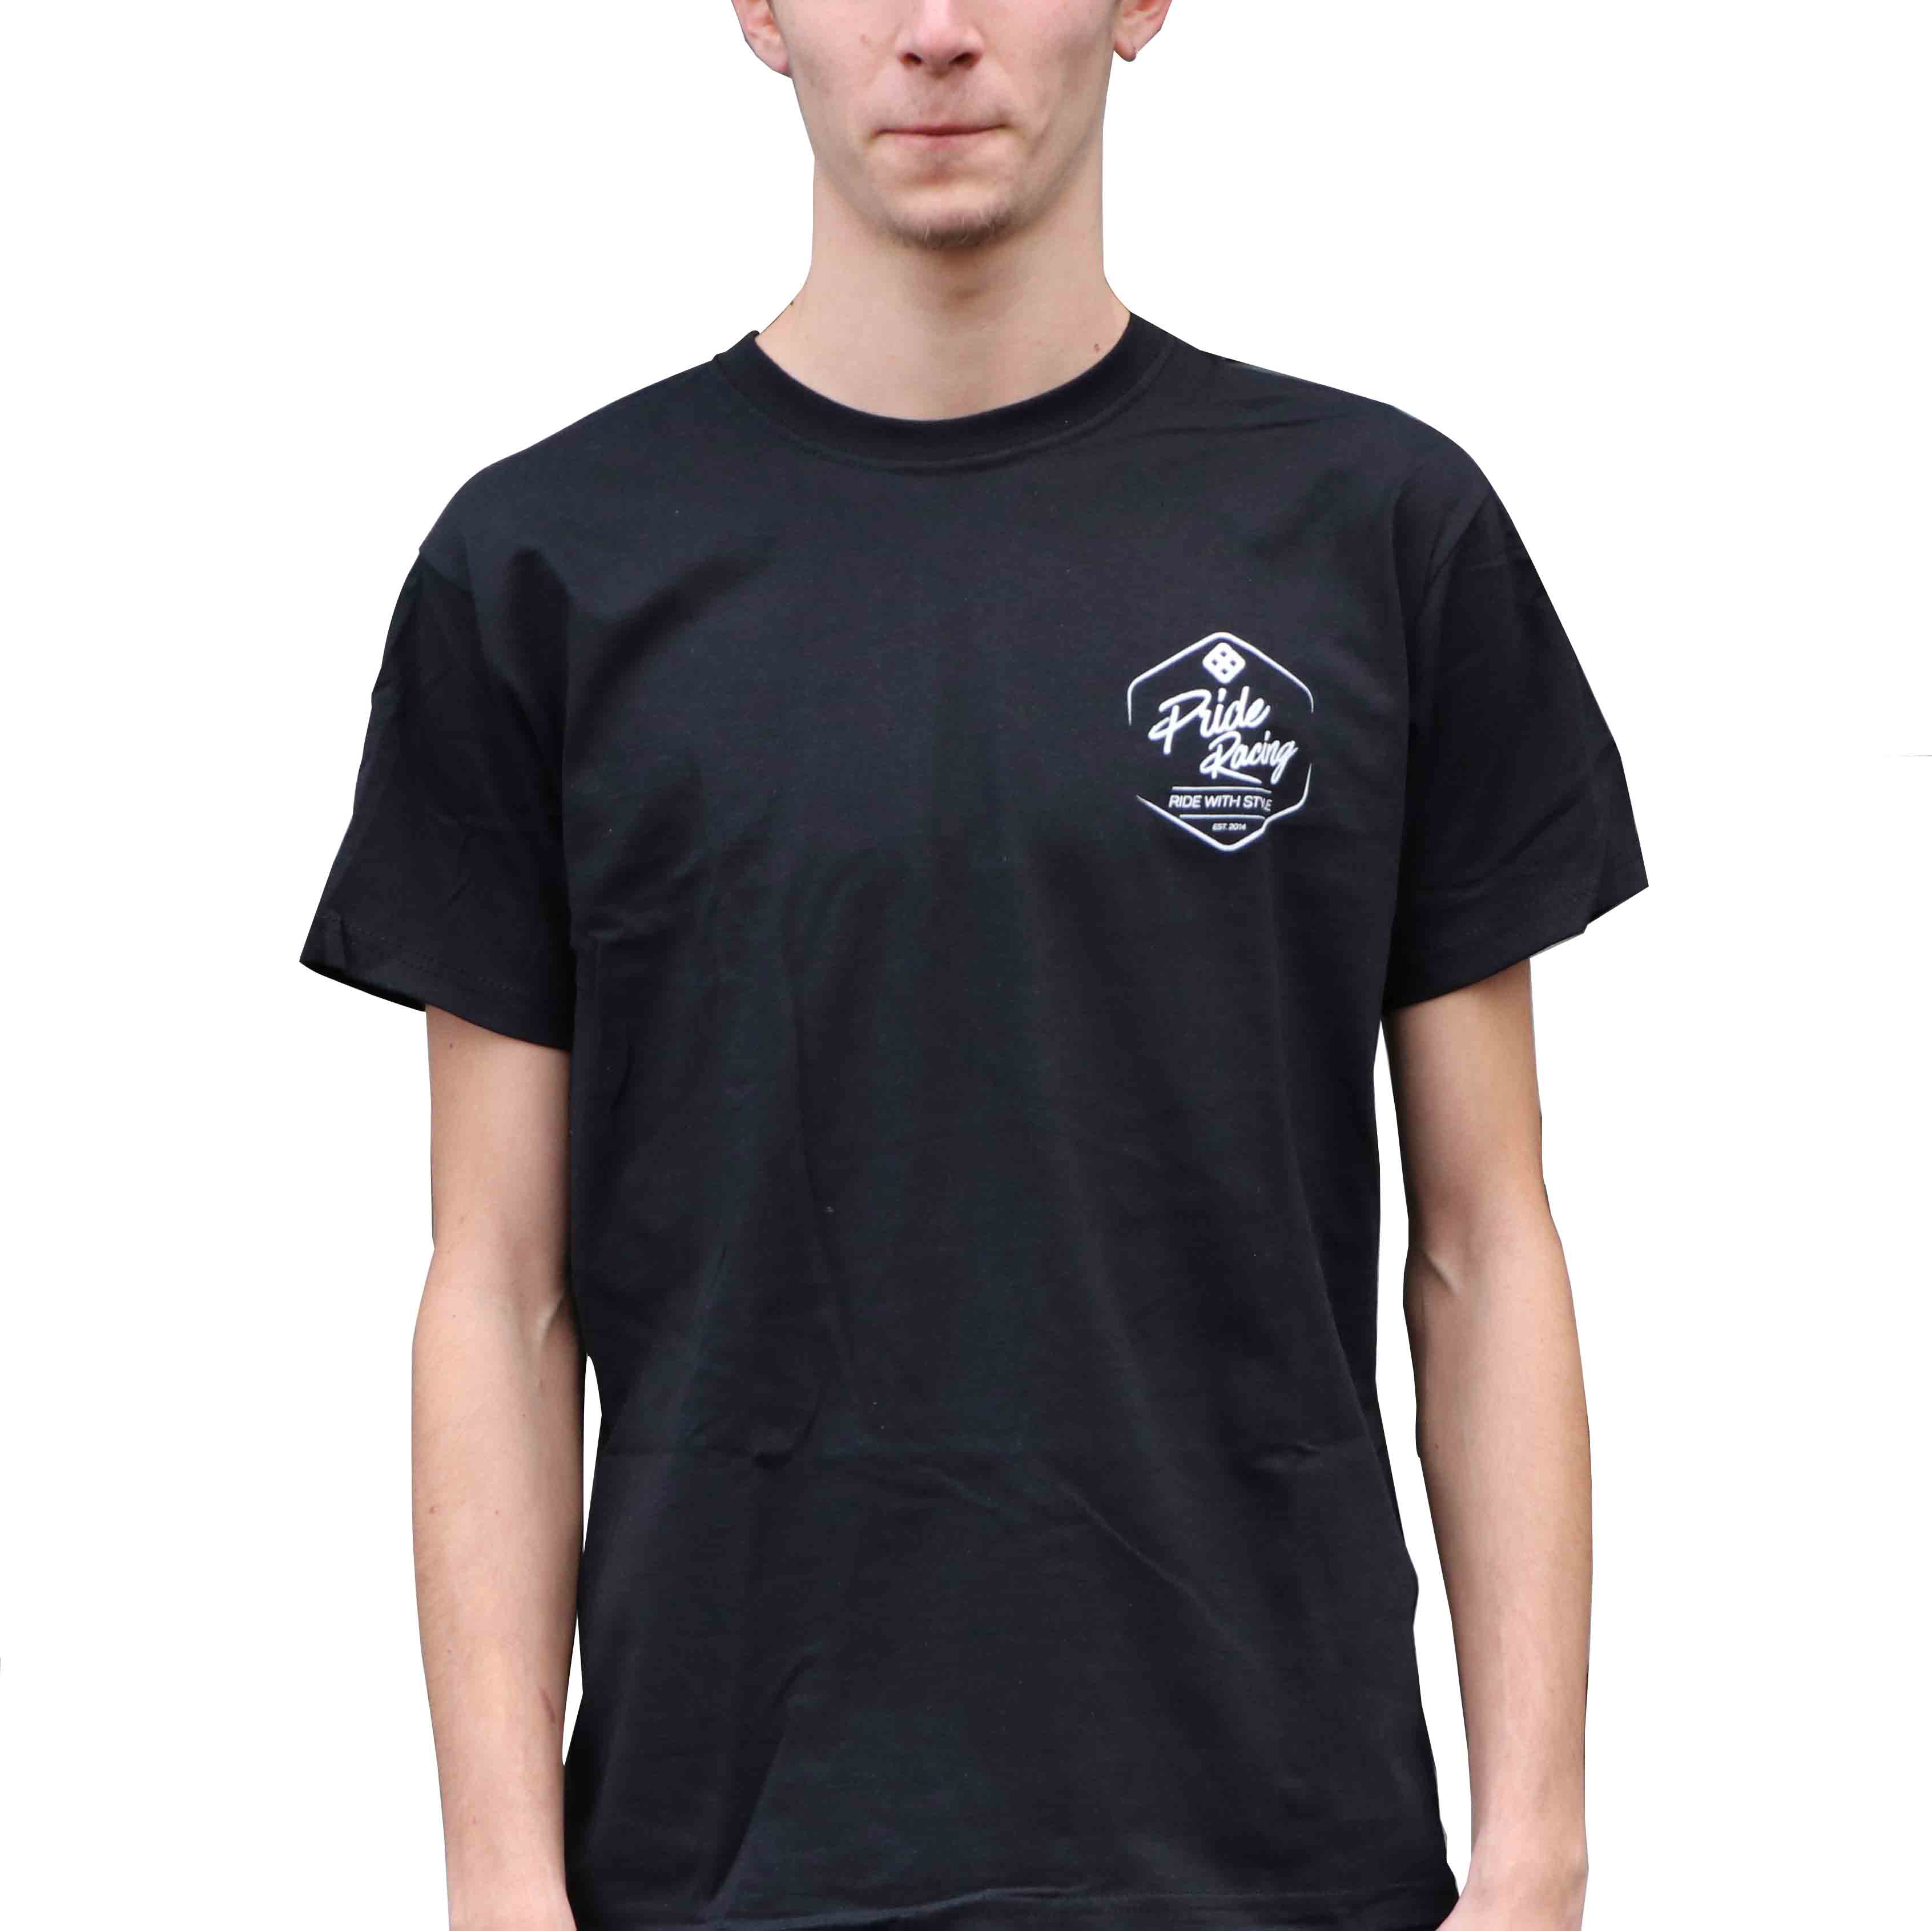 T-Shirt Pride Ride With Style Black